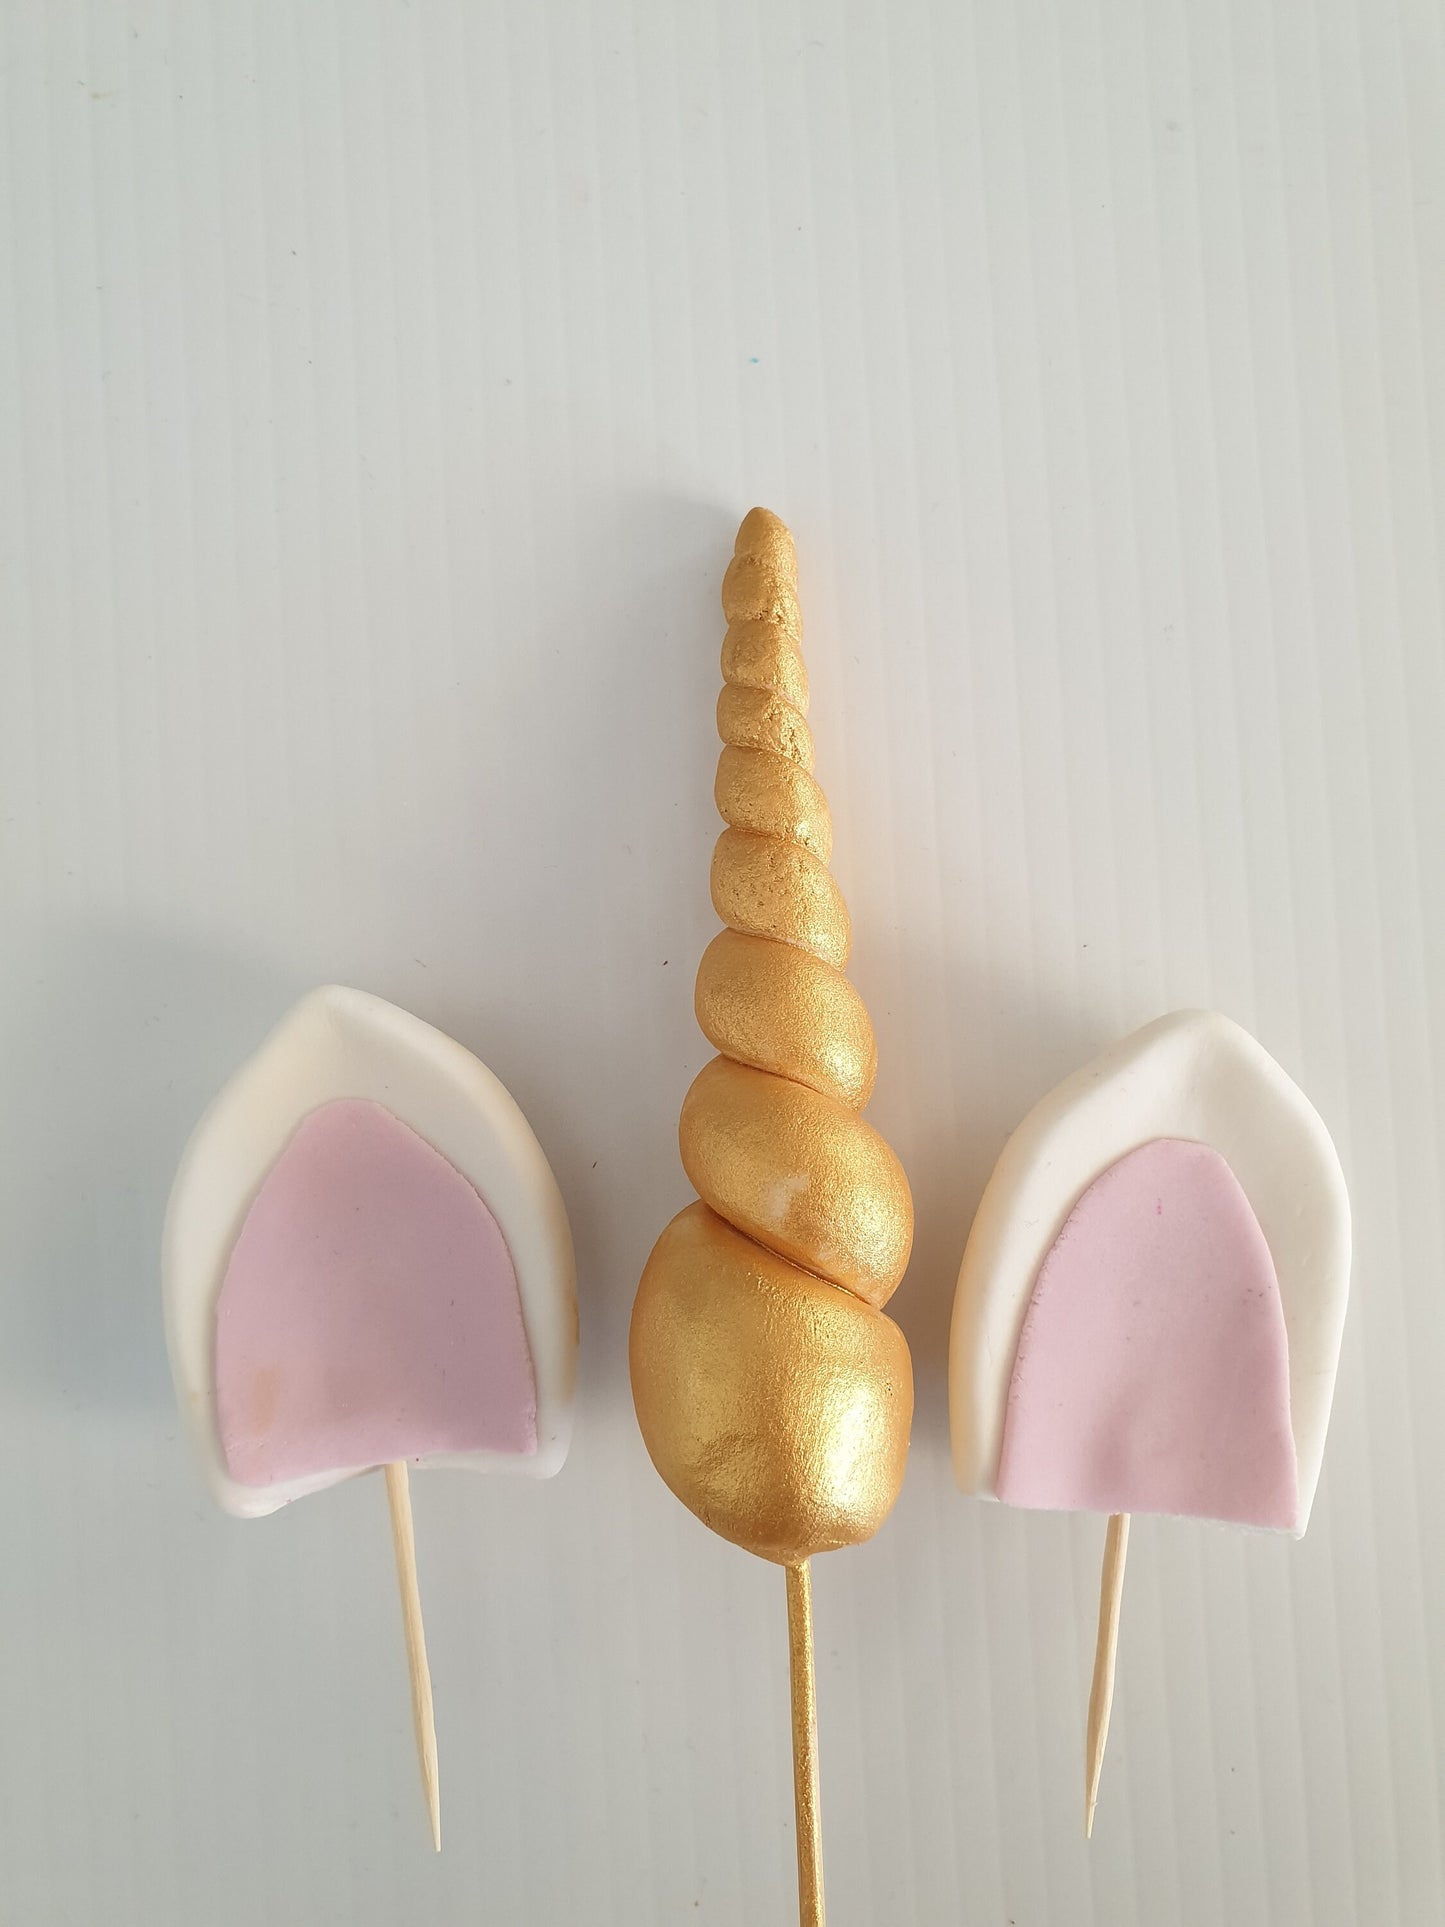 Unicorn horn and ears set edible cake topper decorations